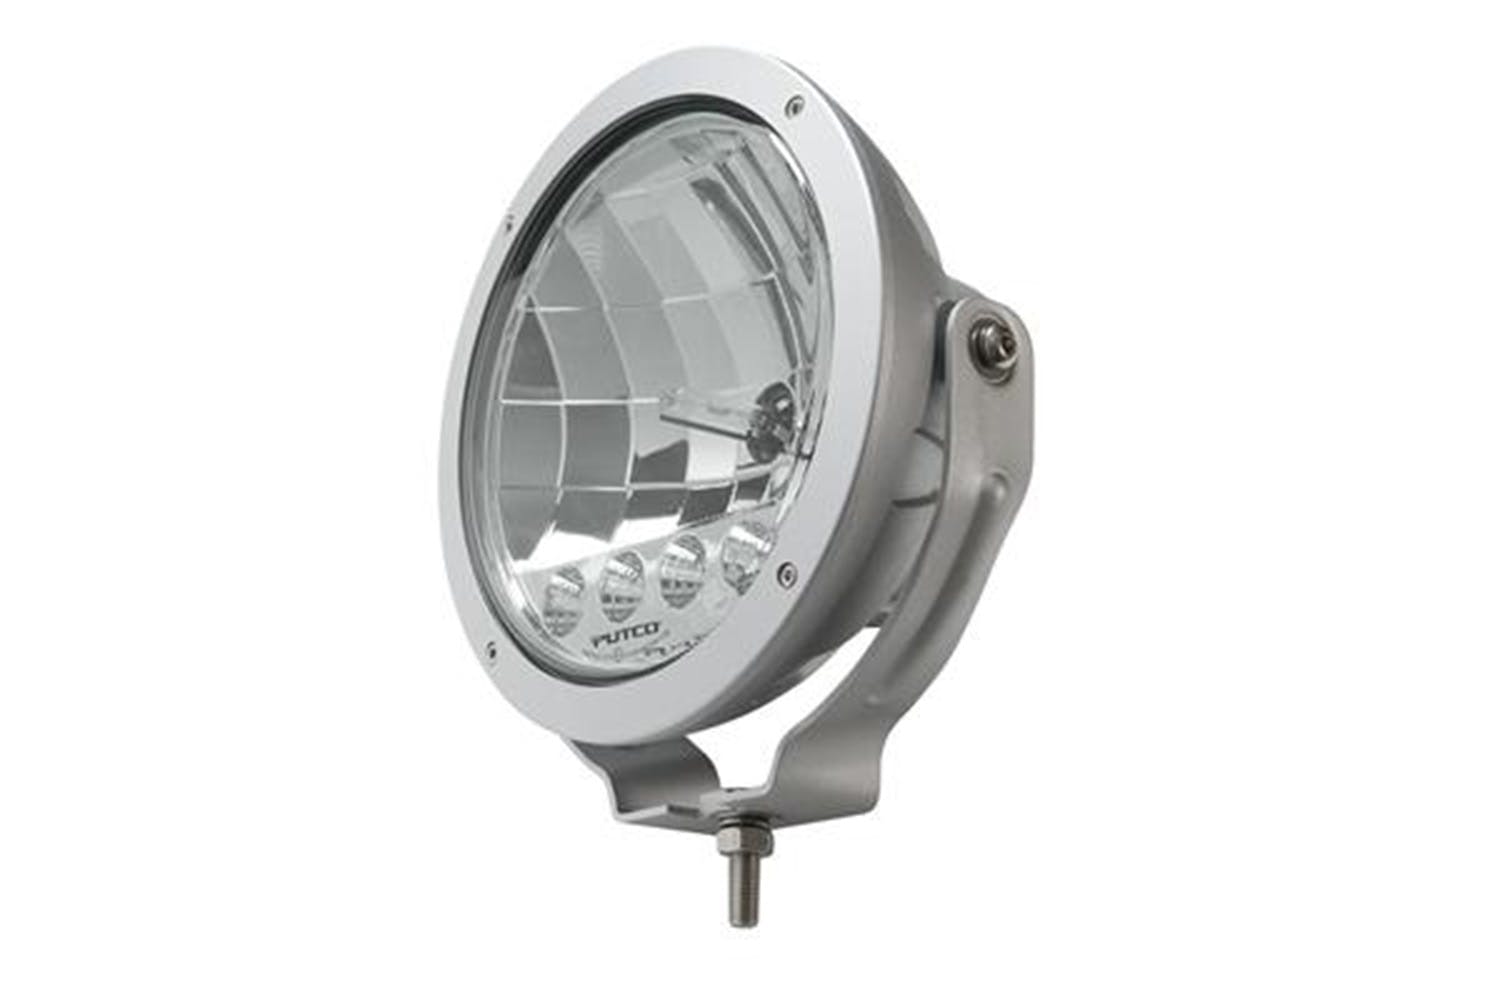 Putco 231910 HID Lamp w/4 LED Daytime Running Lights - 9 inch Silver Housing with Clear Lens